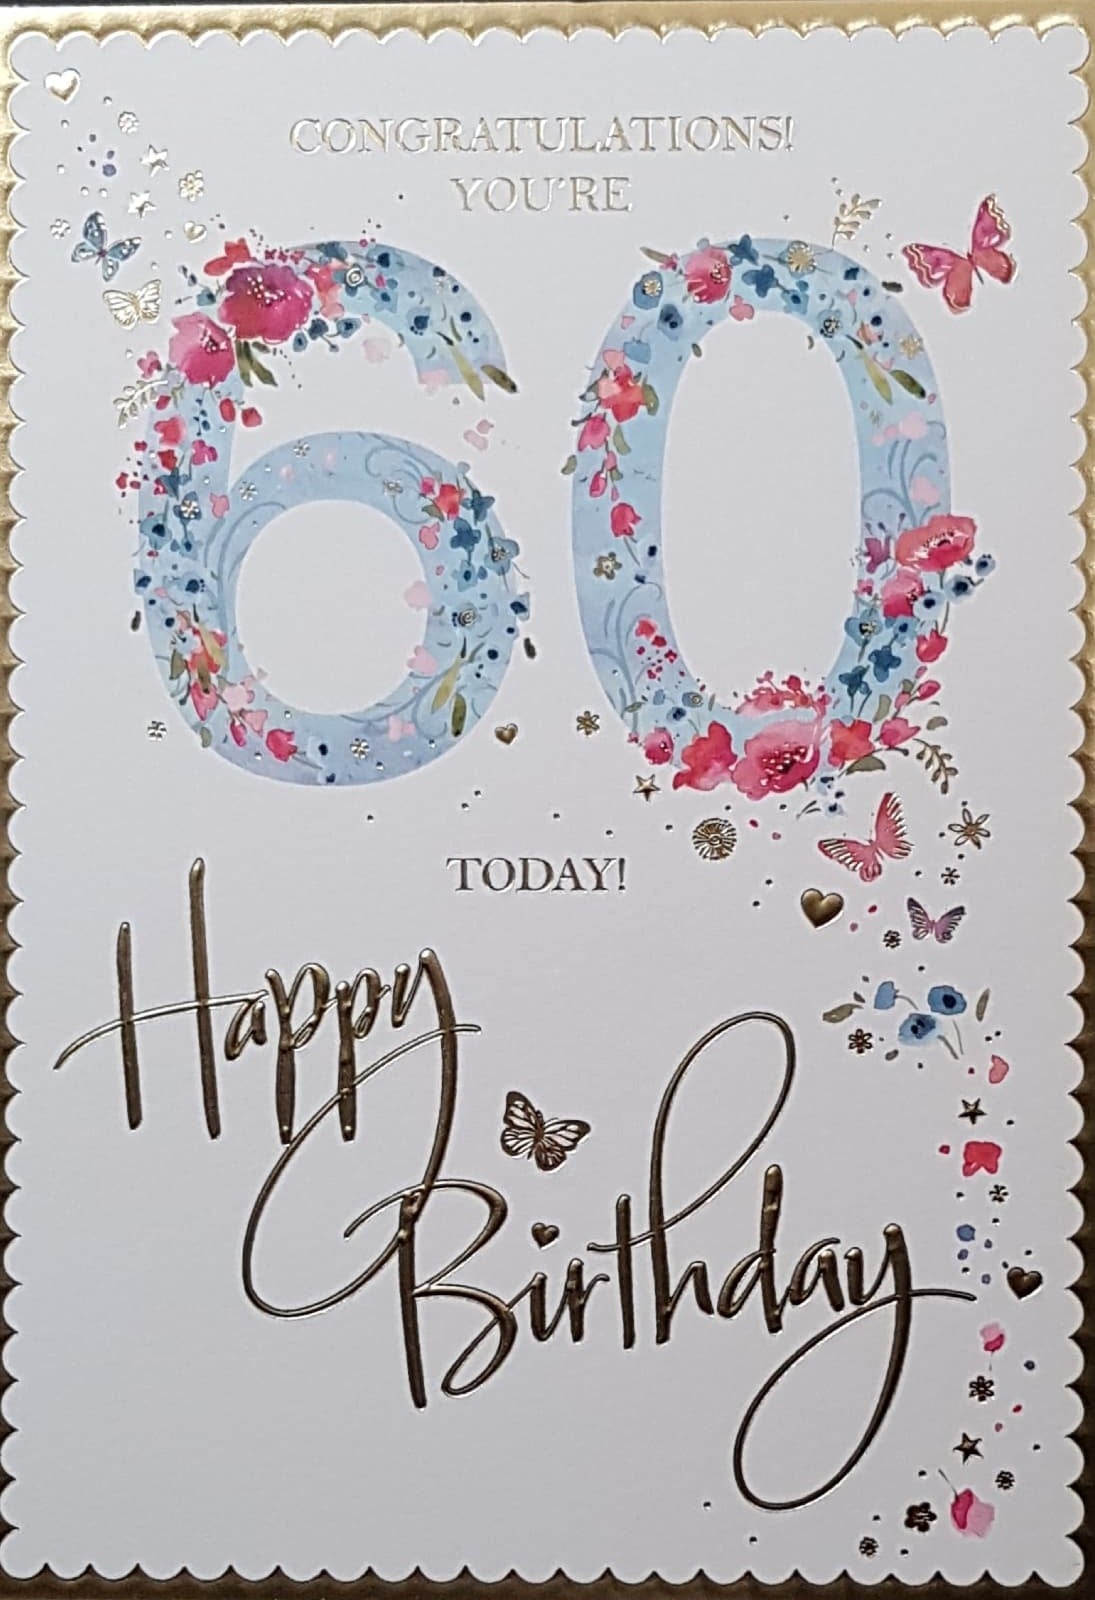 Age 60 Birthday Card - Blue Digits Decorated With Red Flowers & Butterflies